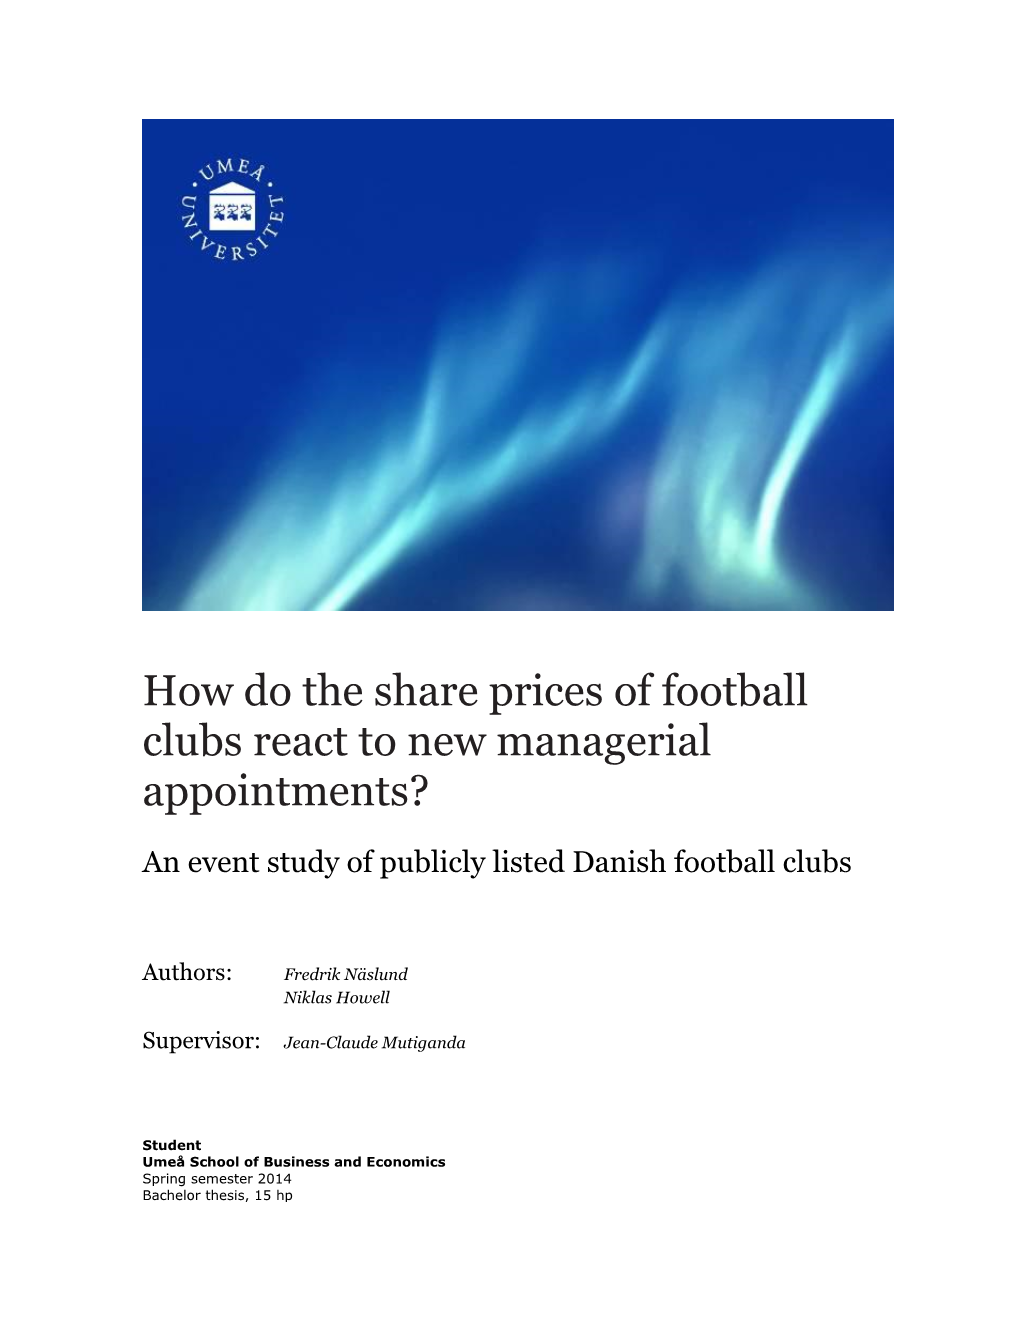 How Do the Share Prices of Football Clubs React to New Managerial Appointments?